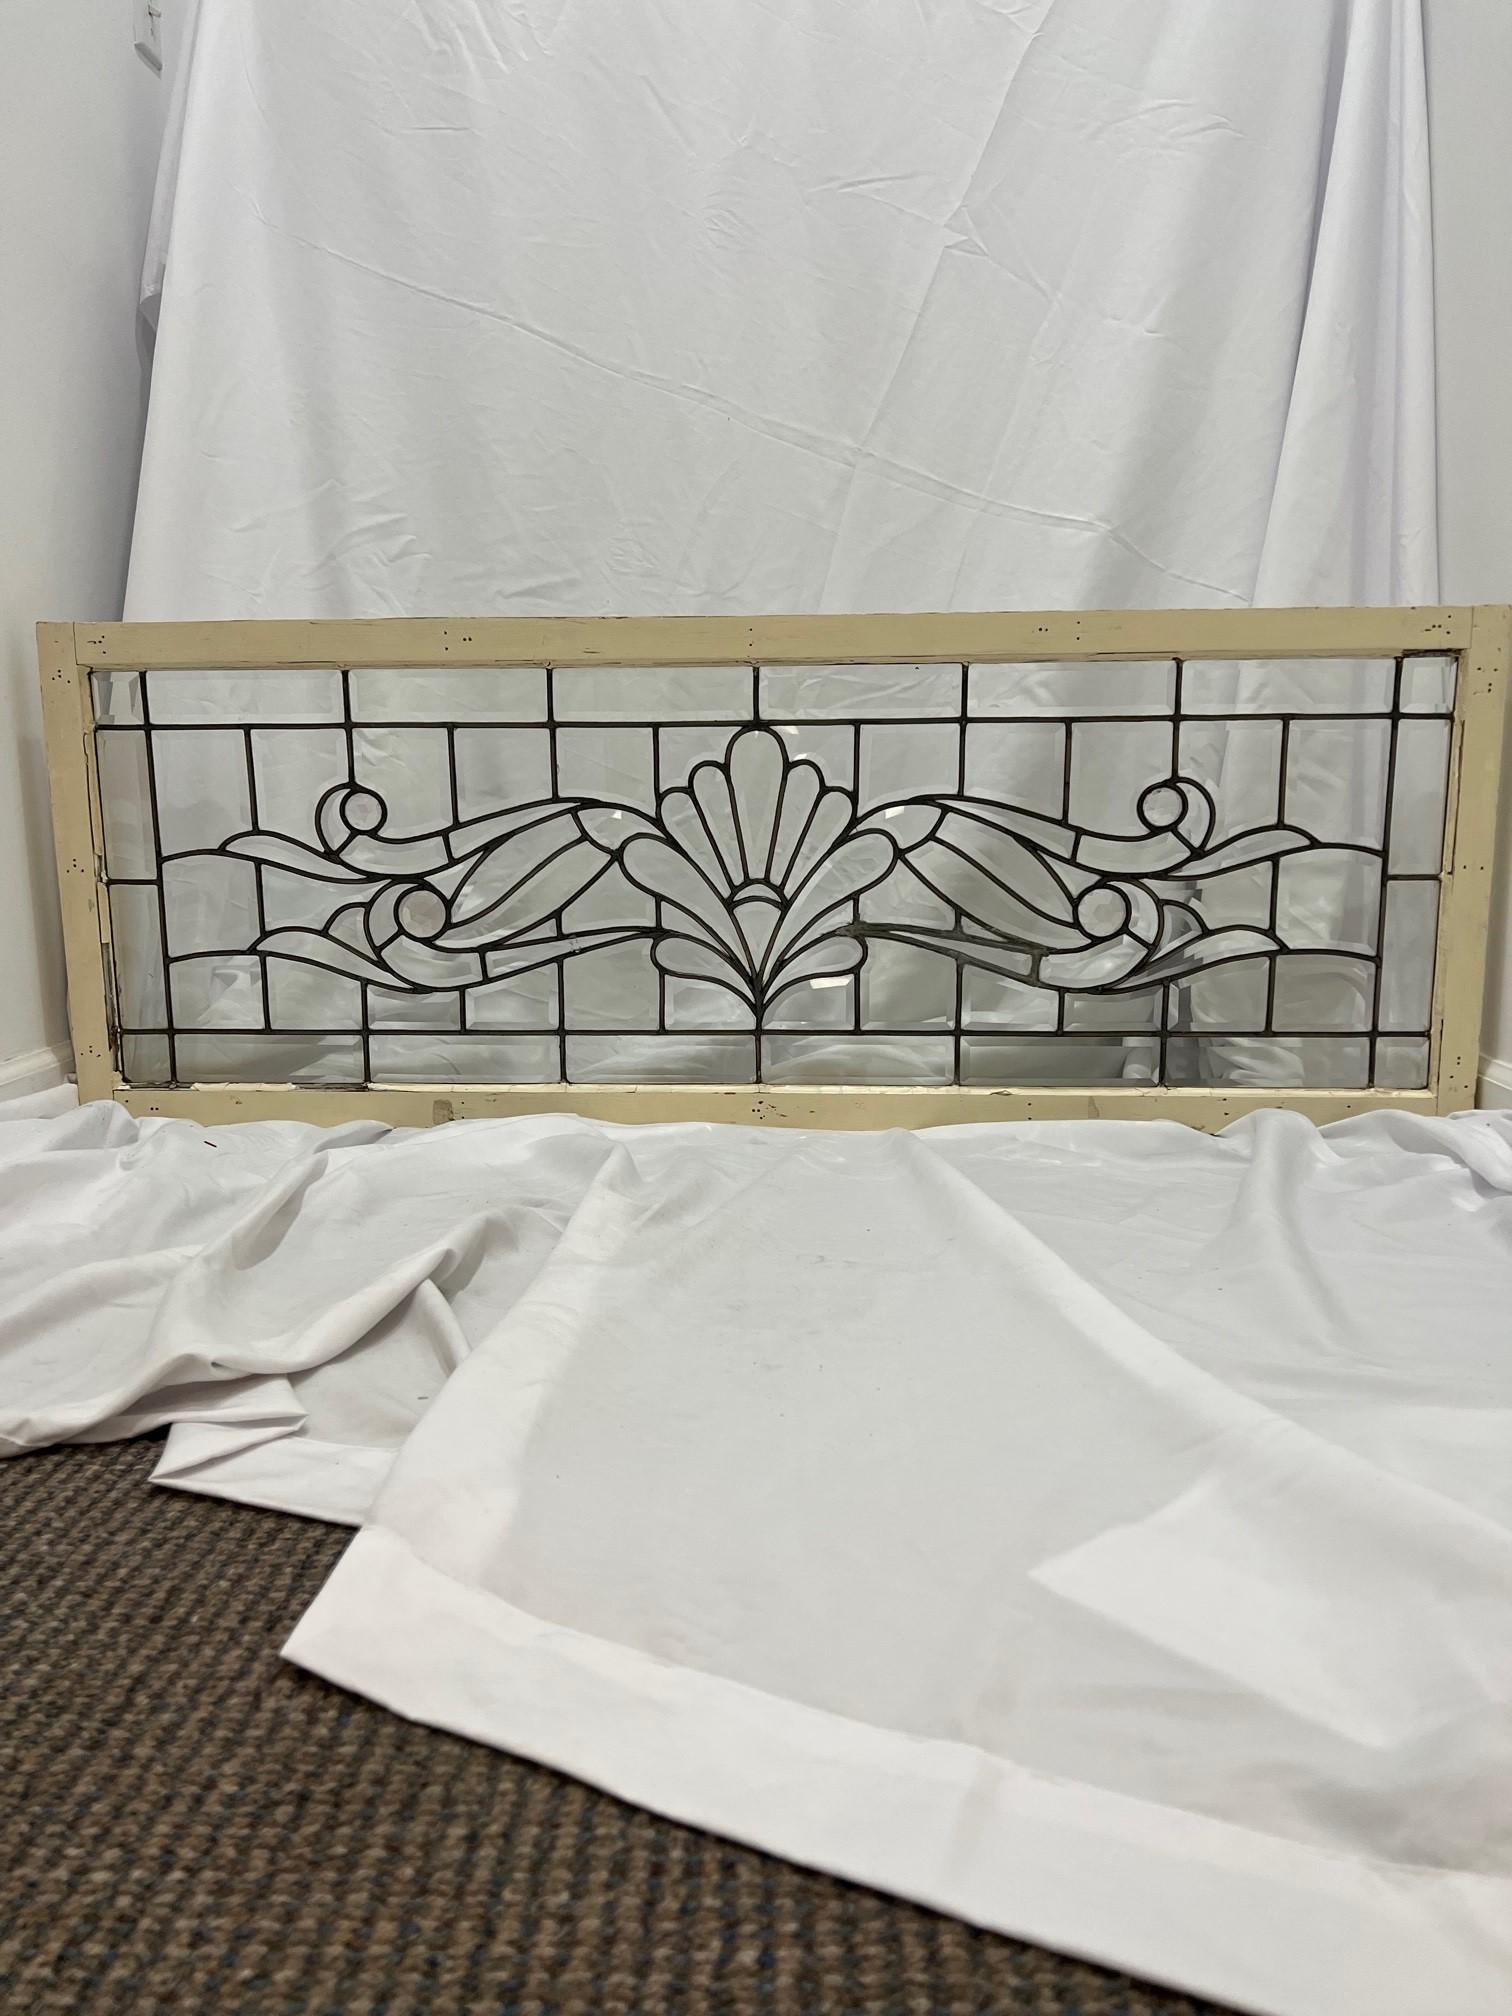 Early 20th century beveled glass transom window with amazing bevels and four jewels. This is a fantastic window from a turn of the century Victorian home in western Pennsylvania. The window is in very good condition with original frame and only has